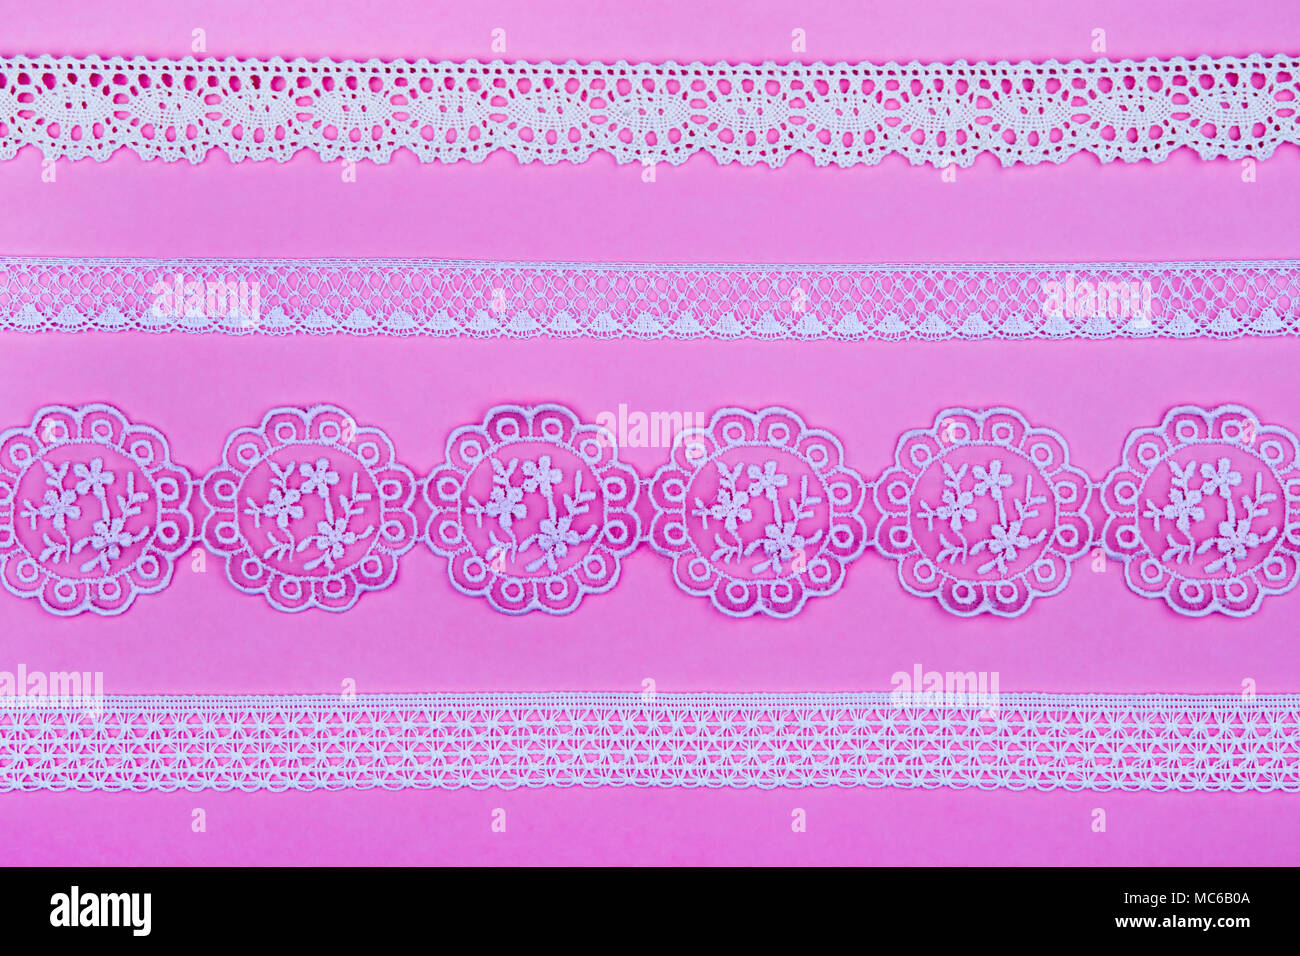 4 different lace borders against pink background. Stock Photo